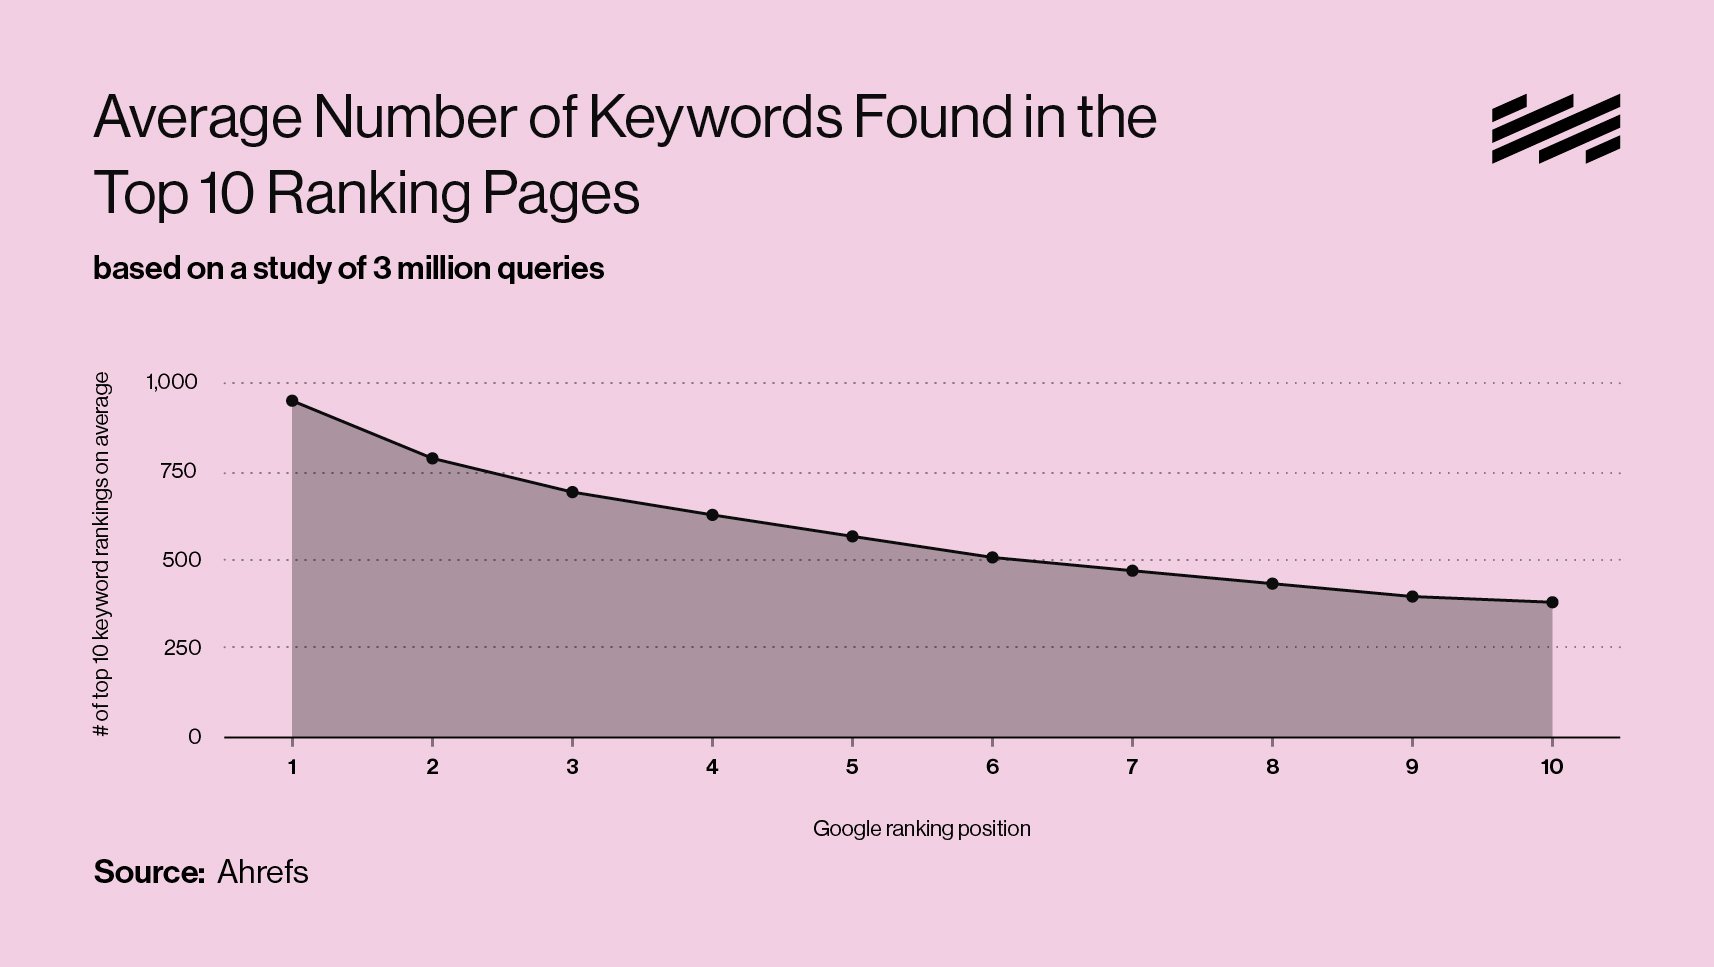 A graph showing the average number of keywords found in the top 10 ranking pages based on a study of three million queries, with data courtesy of Ahrefs. The graphic reinforces that the pages that rank closest to position one have the highest average number of keywords.